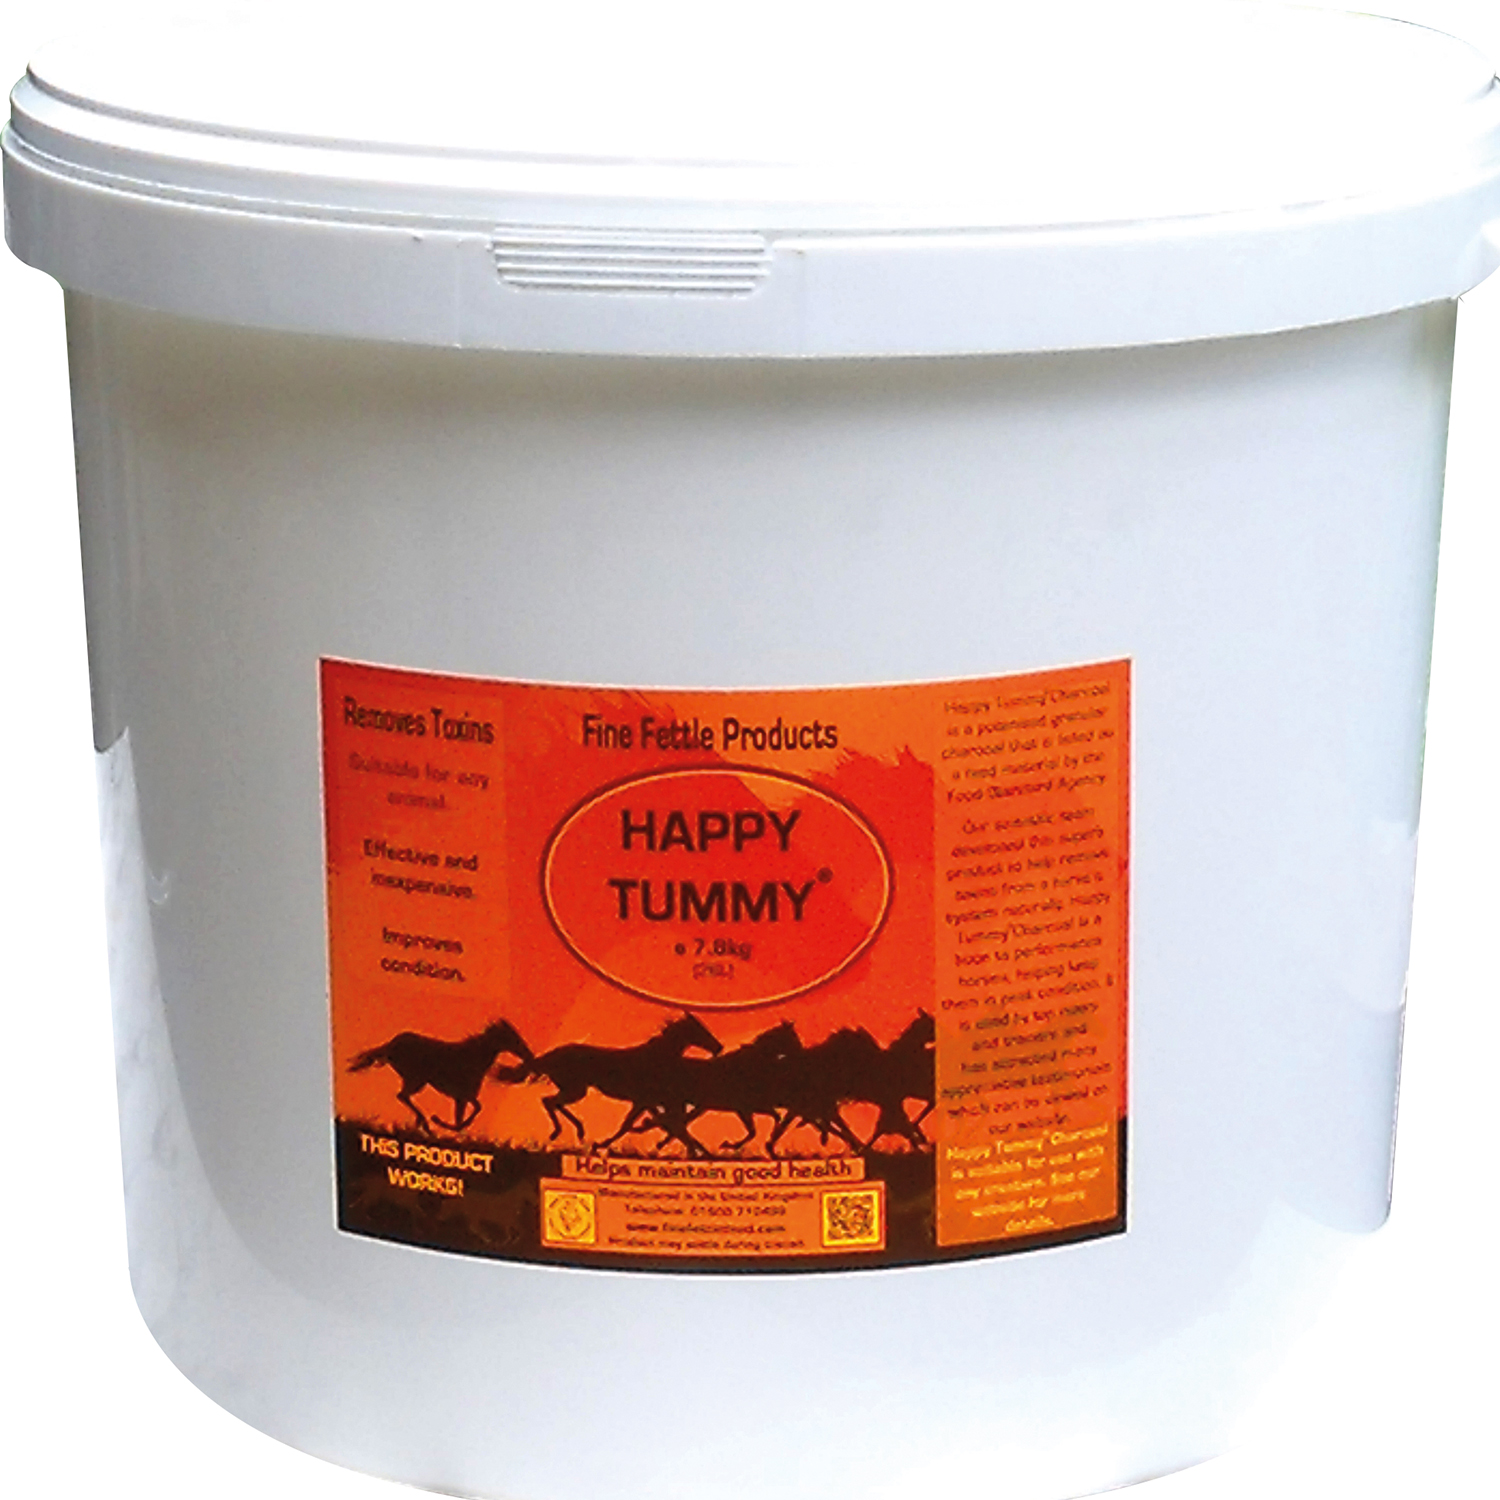 FINE FETTLE PRODUCTS HAPPY TUMMY 7.8 KG 7.8 KG